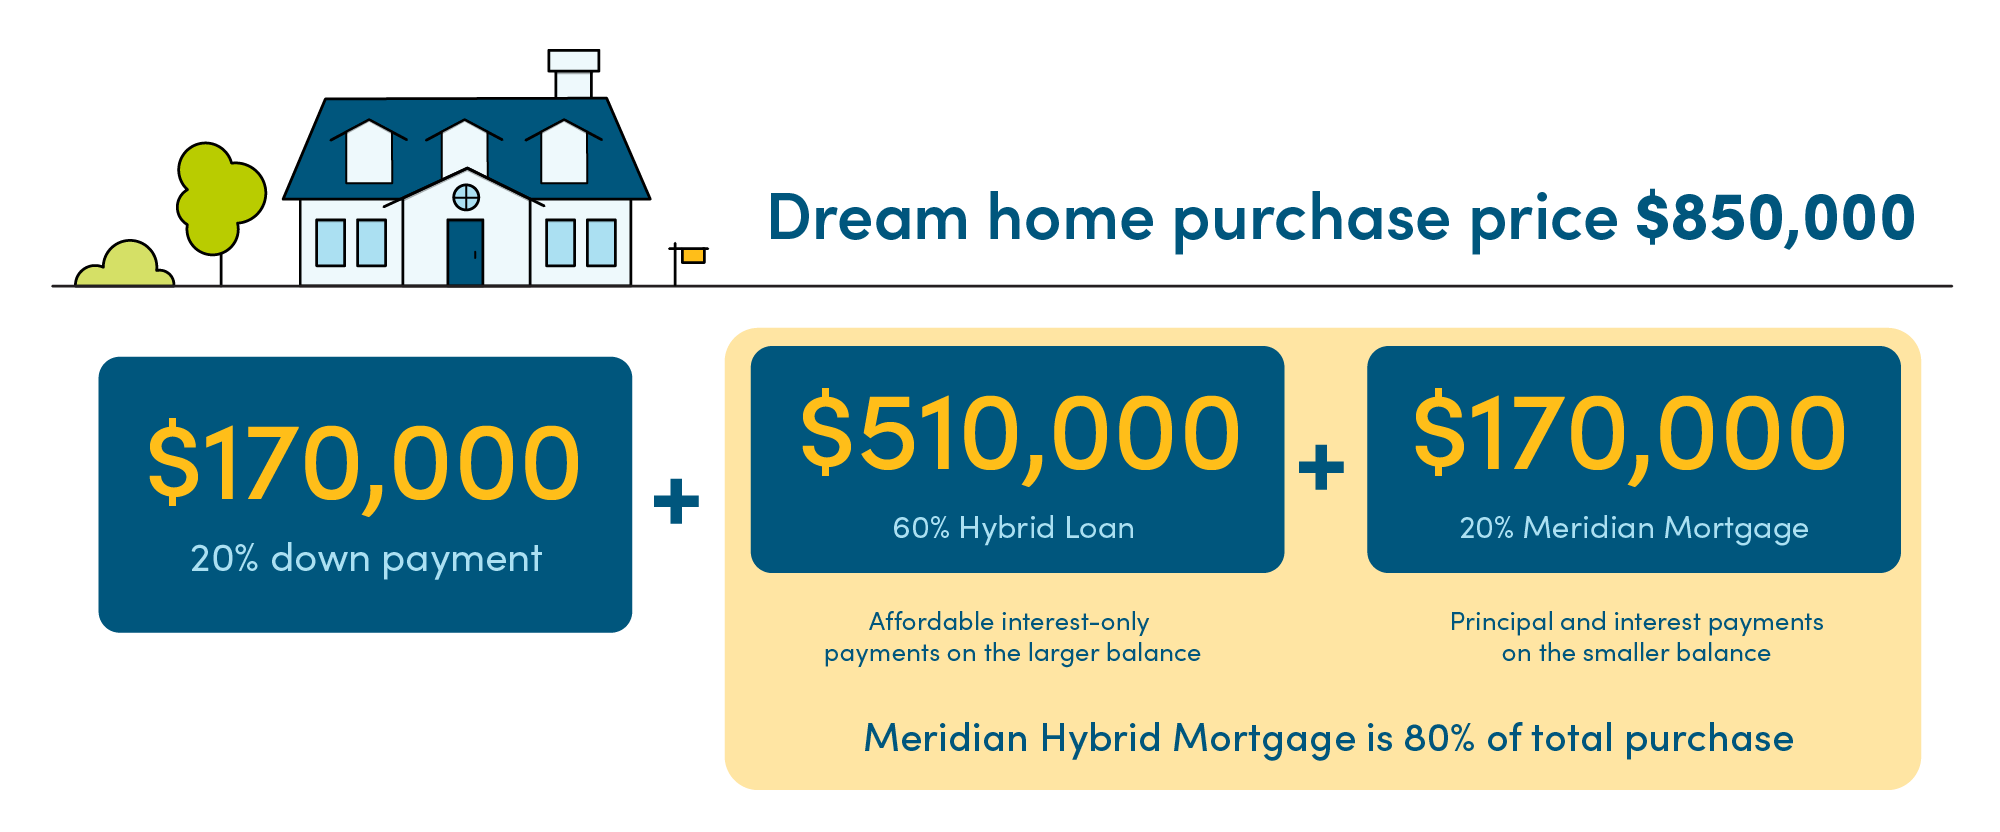 Home price is $850K. The Meridian Hybrid Mortgage is 80% of total purchase. 60% hybrid loan with affordable interest-only payments on the larger balance = $510. 20% Meridian Mortgage with principal and interest payments on the smaller balance = $170K. 